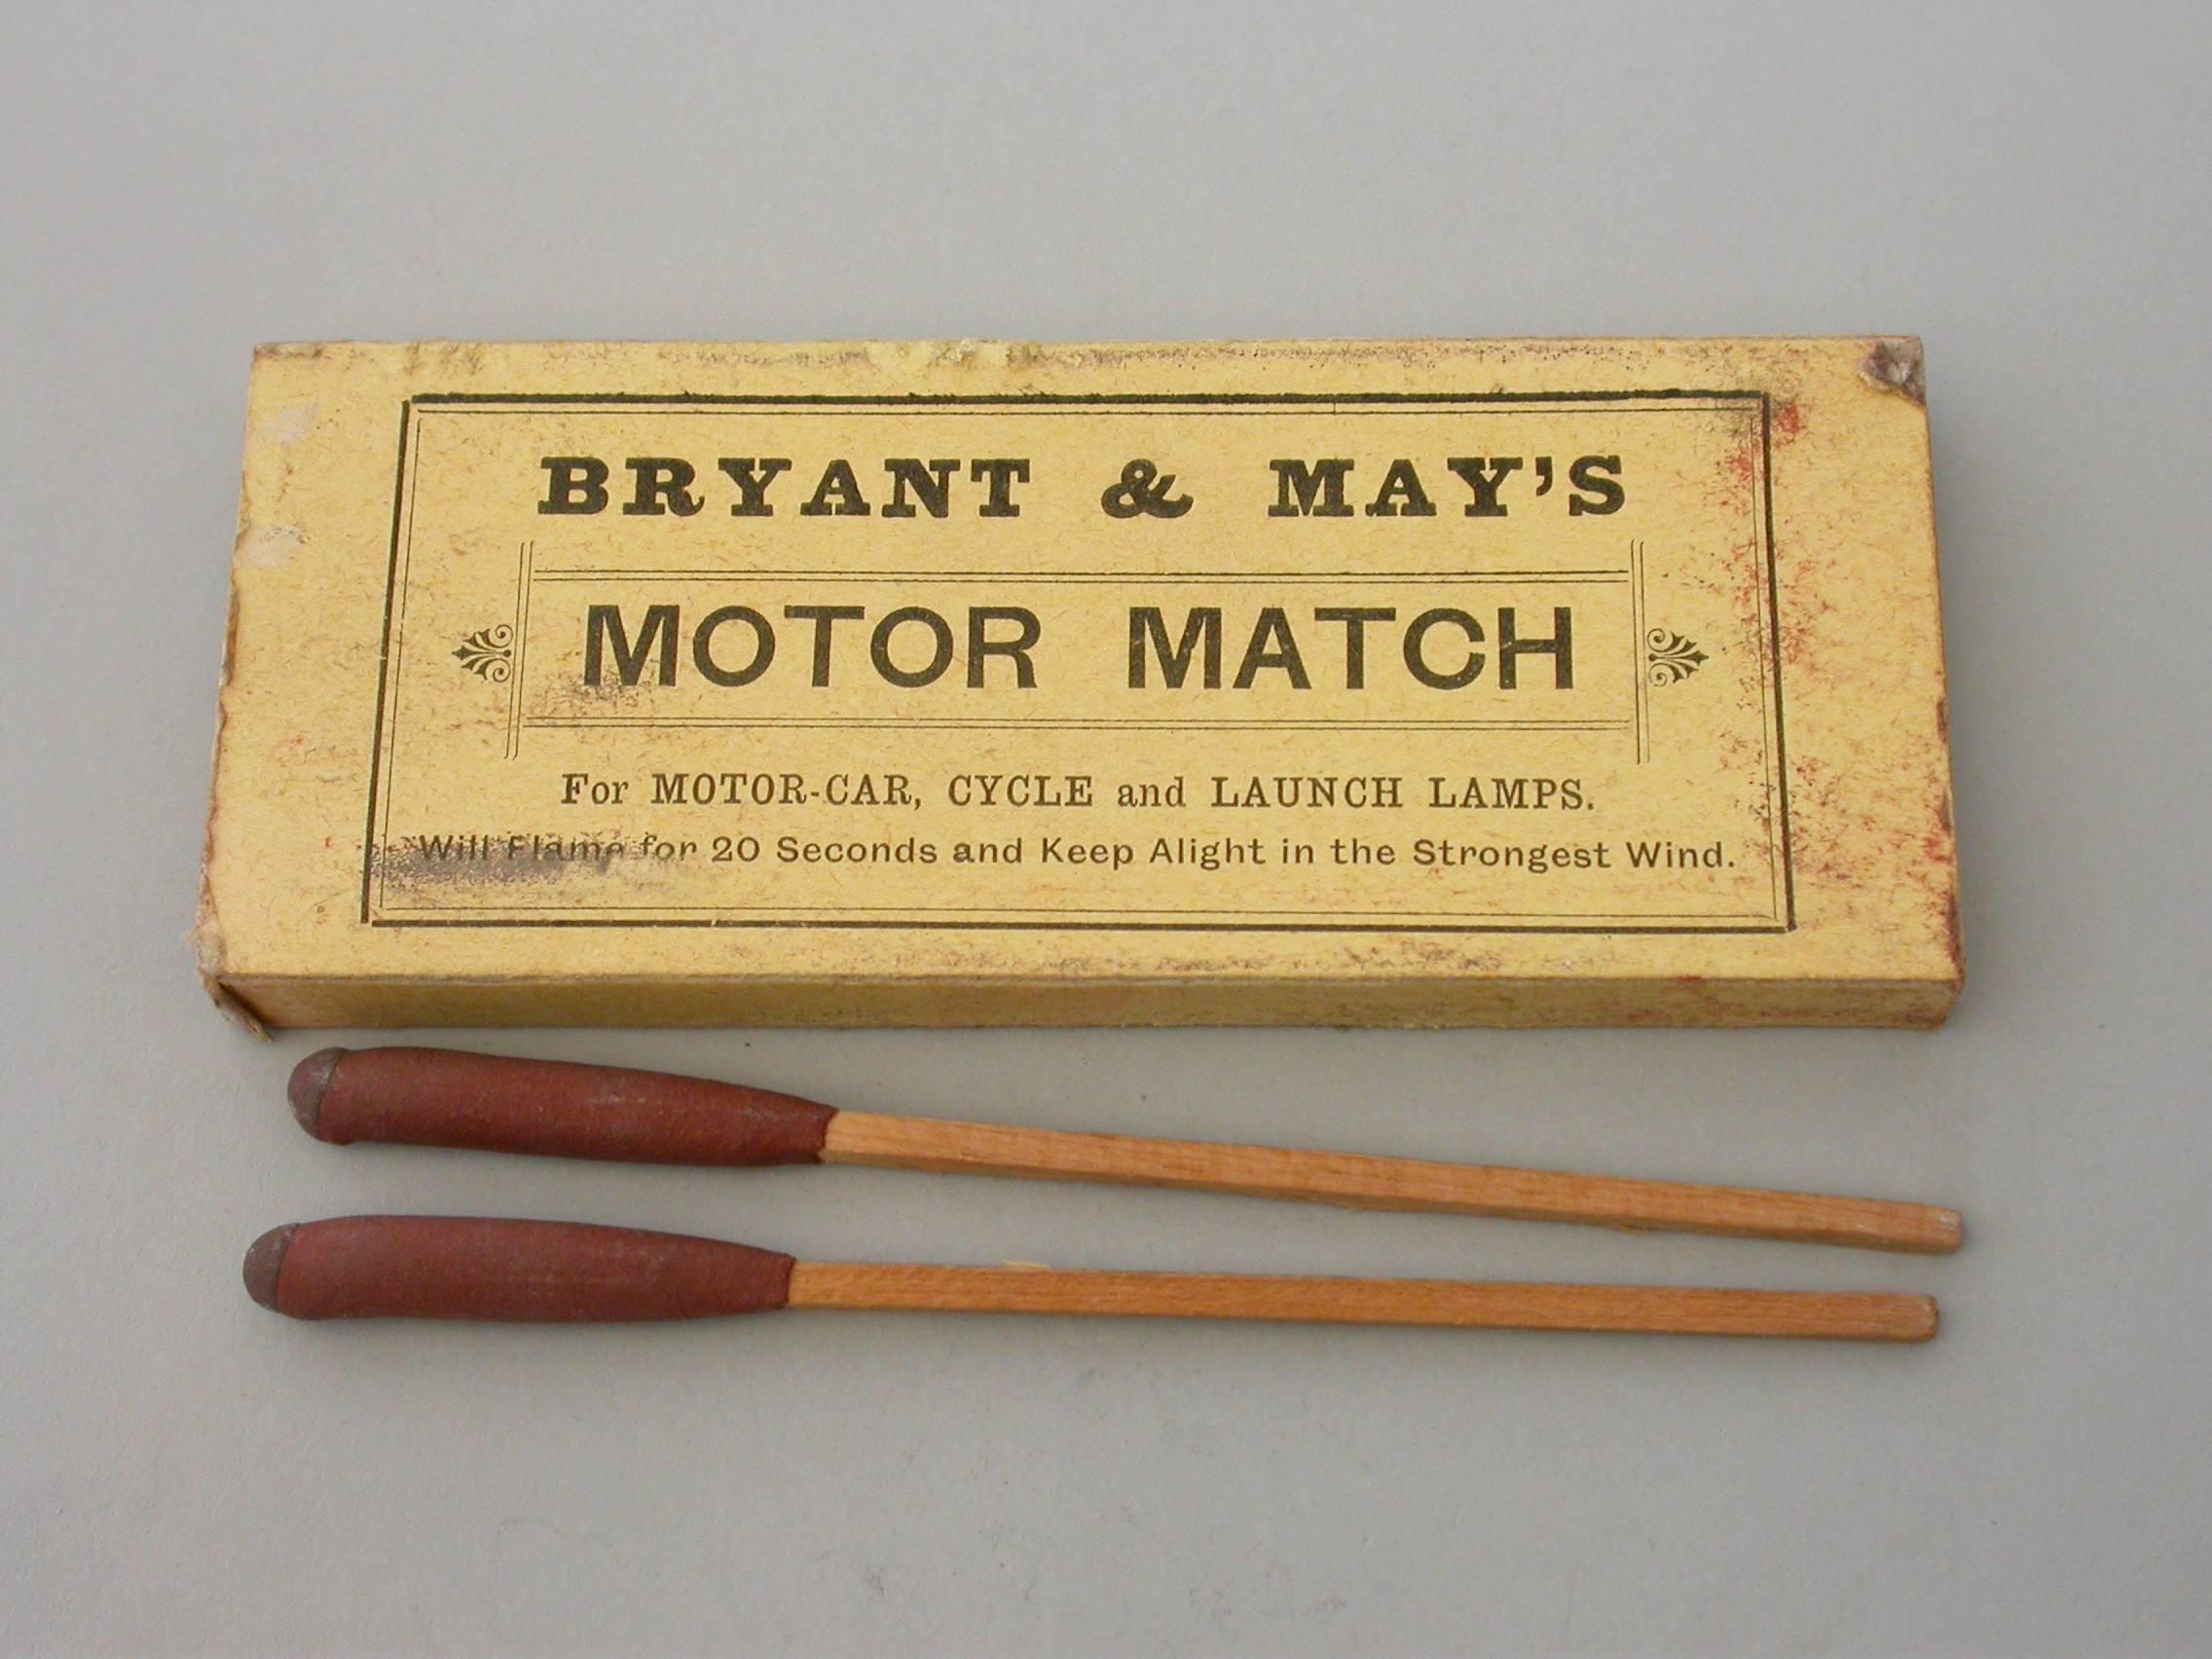 An unusual Edwardian large silver matchbox case of plain narrow rectangualr form with hinged lid and aperture for striking, containing an original box of Bryant & May's 